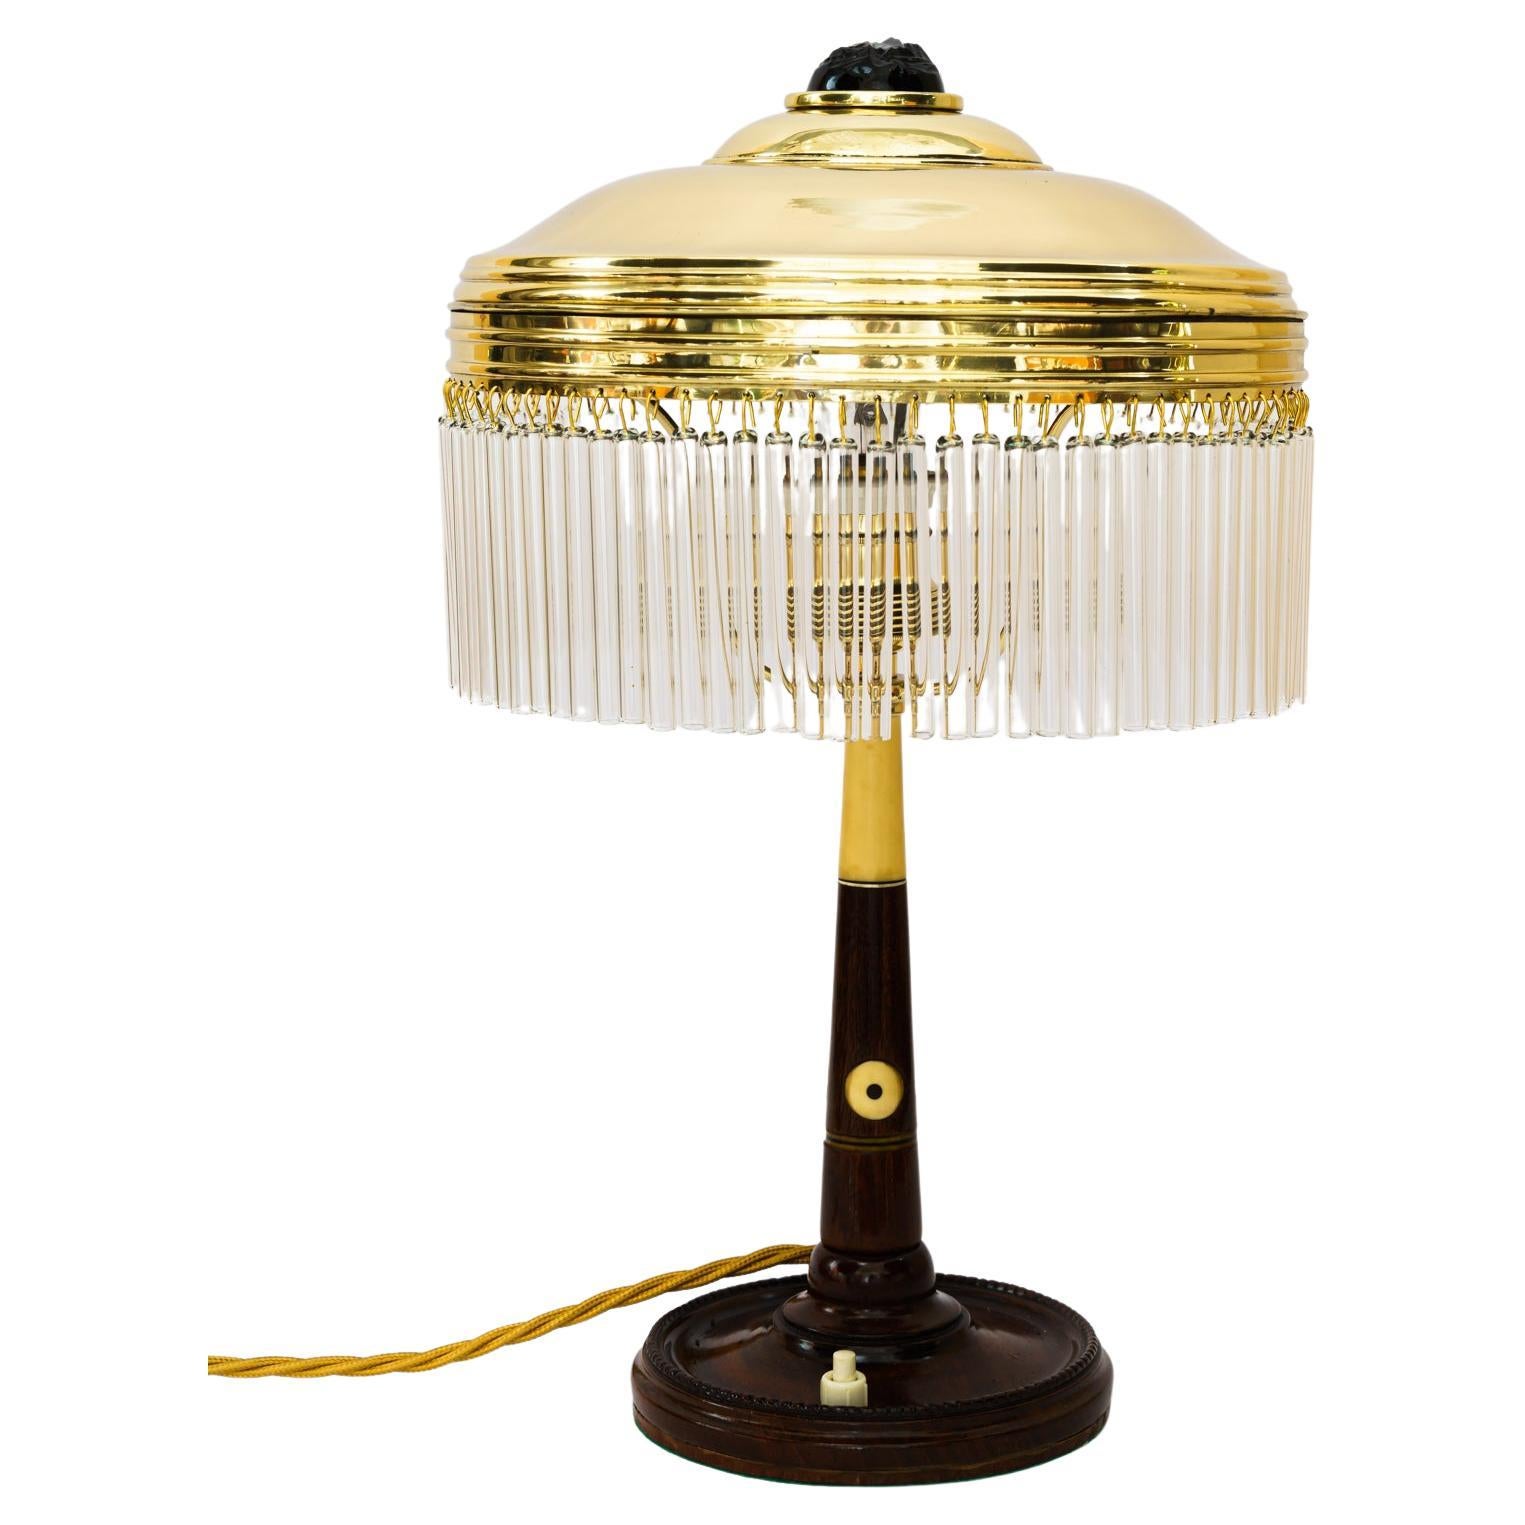 Rare Art Deco Table Lamp with Glass Sticks, Vienna, Around 1920s For Sale